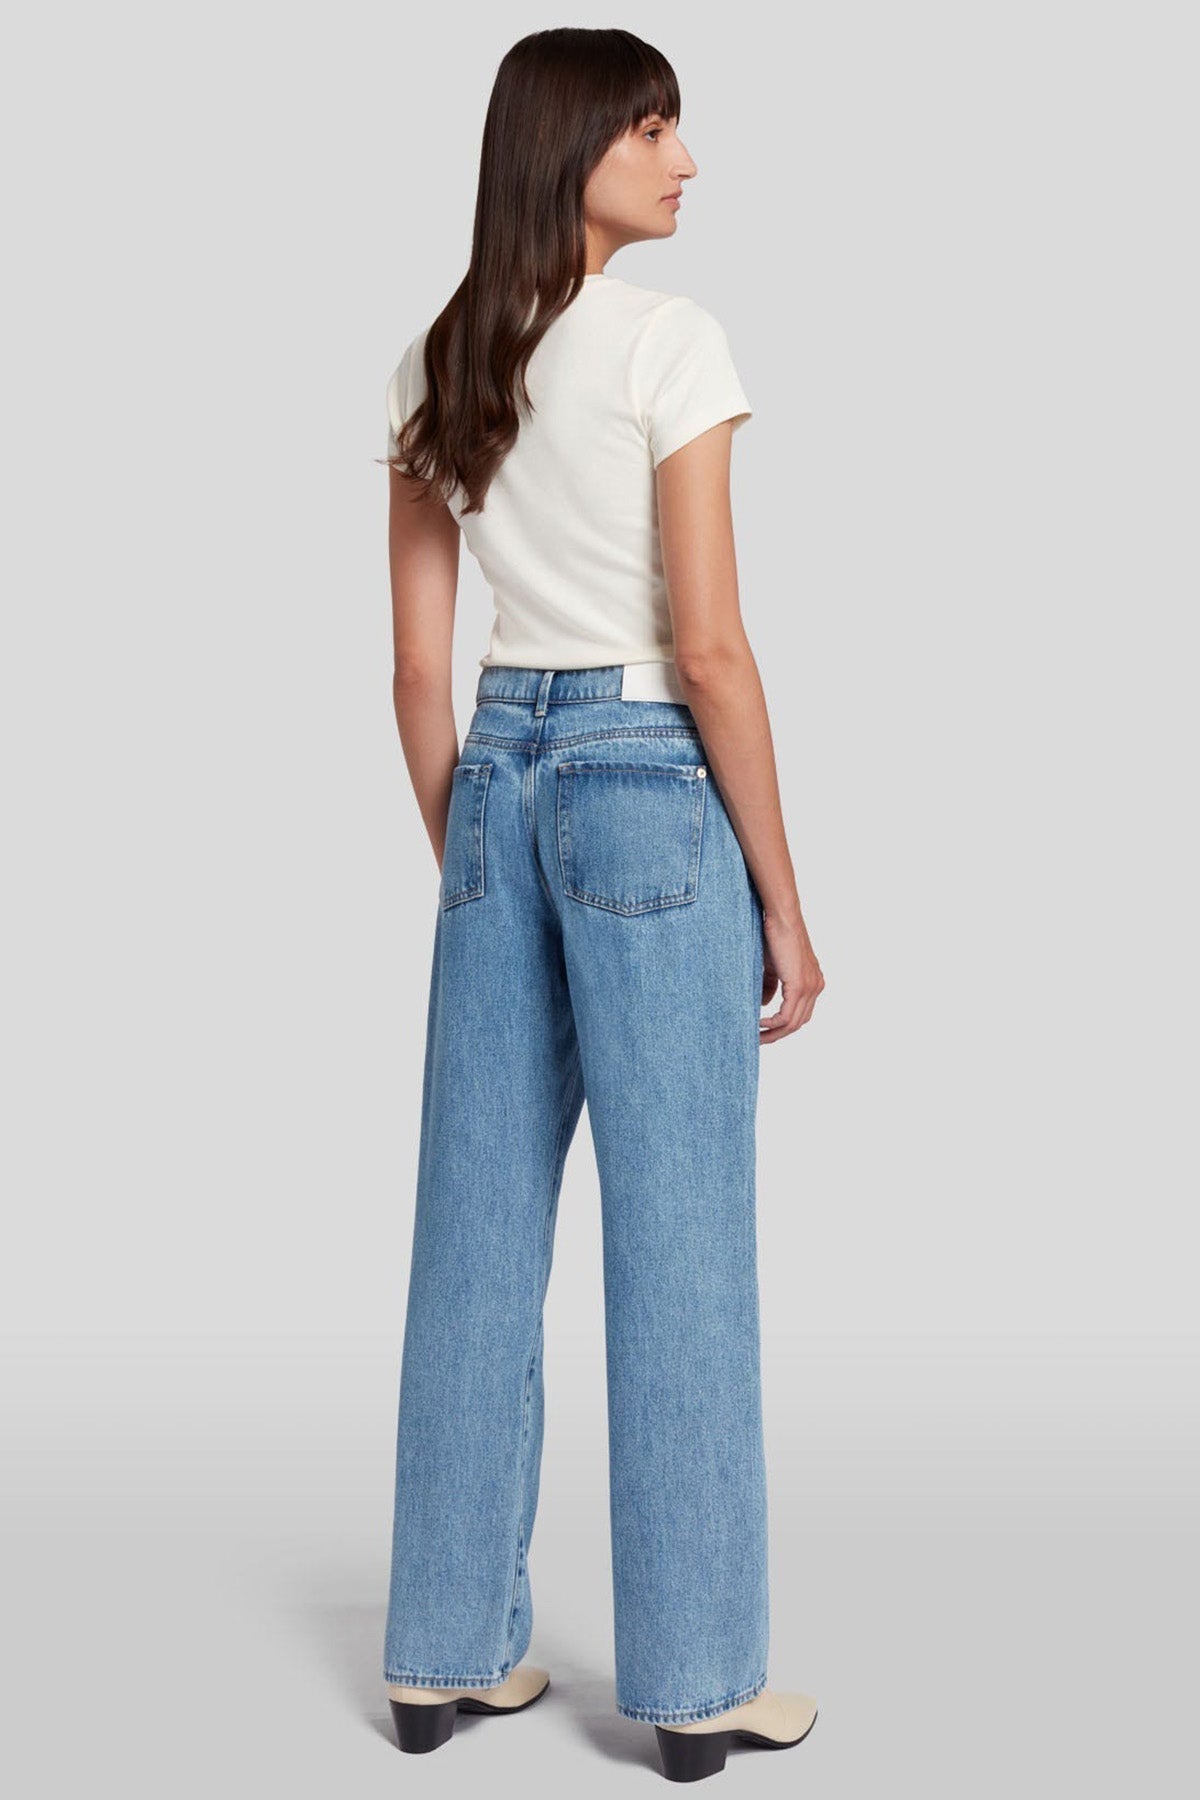 7 For All Mankind Valentine Tess Trouser Straight Fit Jeans